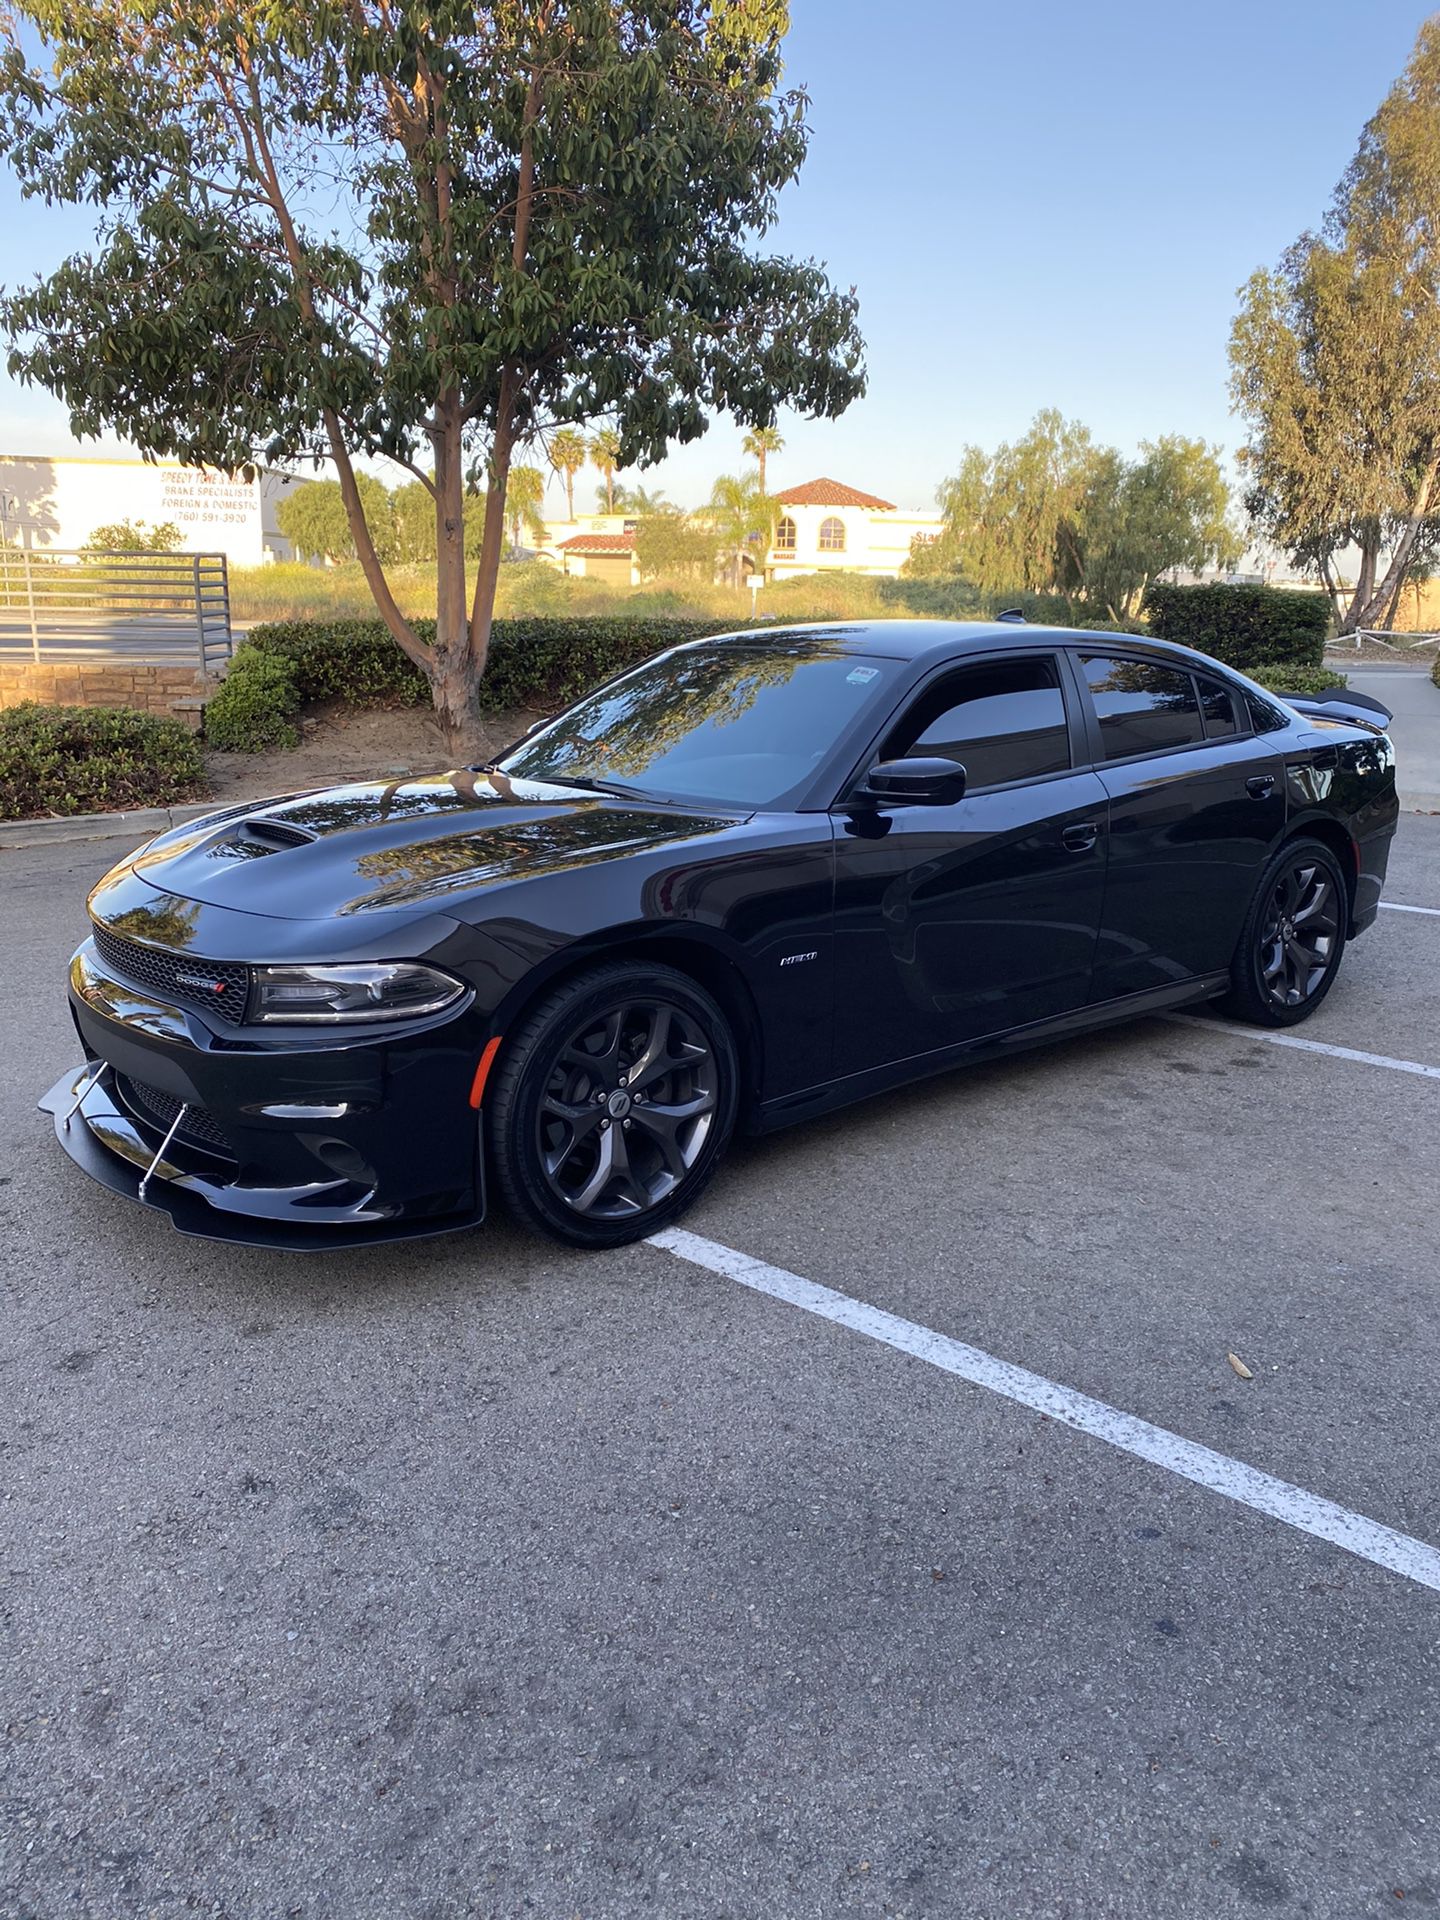 2019 charger stock wheels 20”